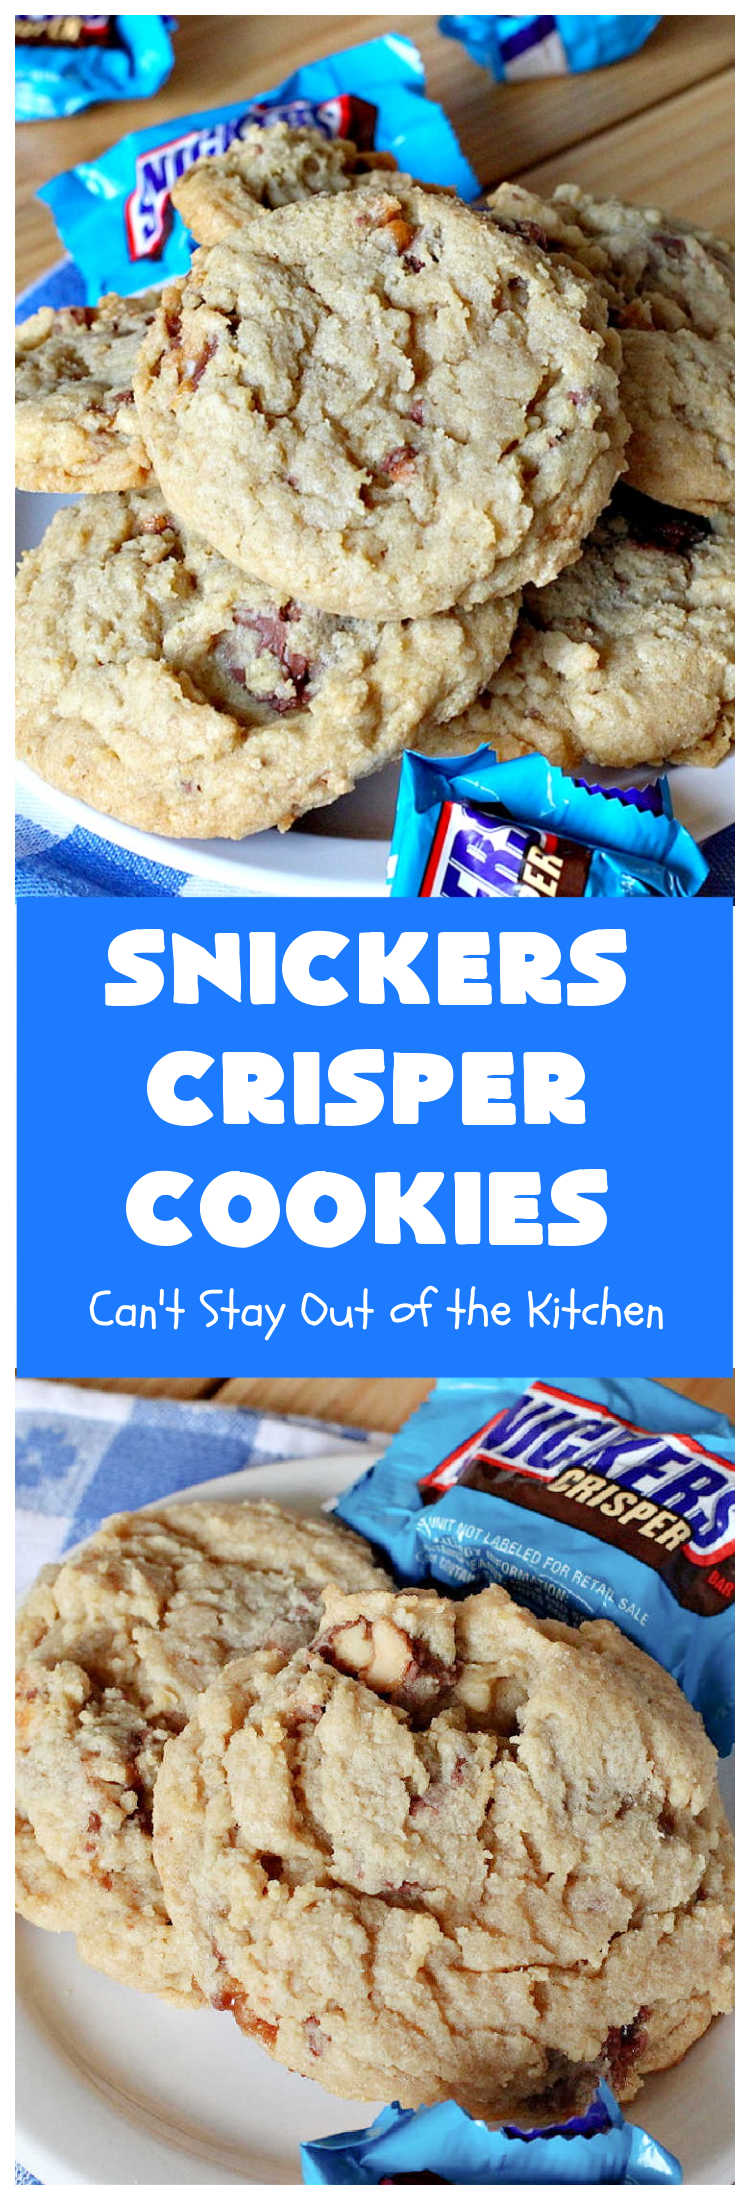 Snickers Crisper Cookies | Can't Stay Out of the KitchenSnickers Crisper Cookies | Can't Stay Out of the Kitchen